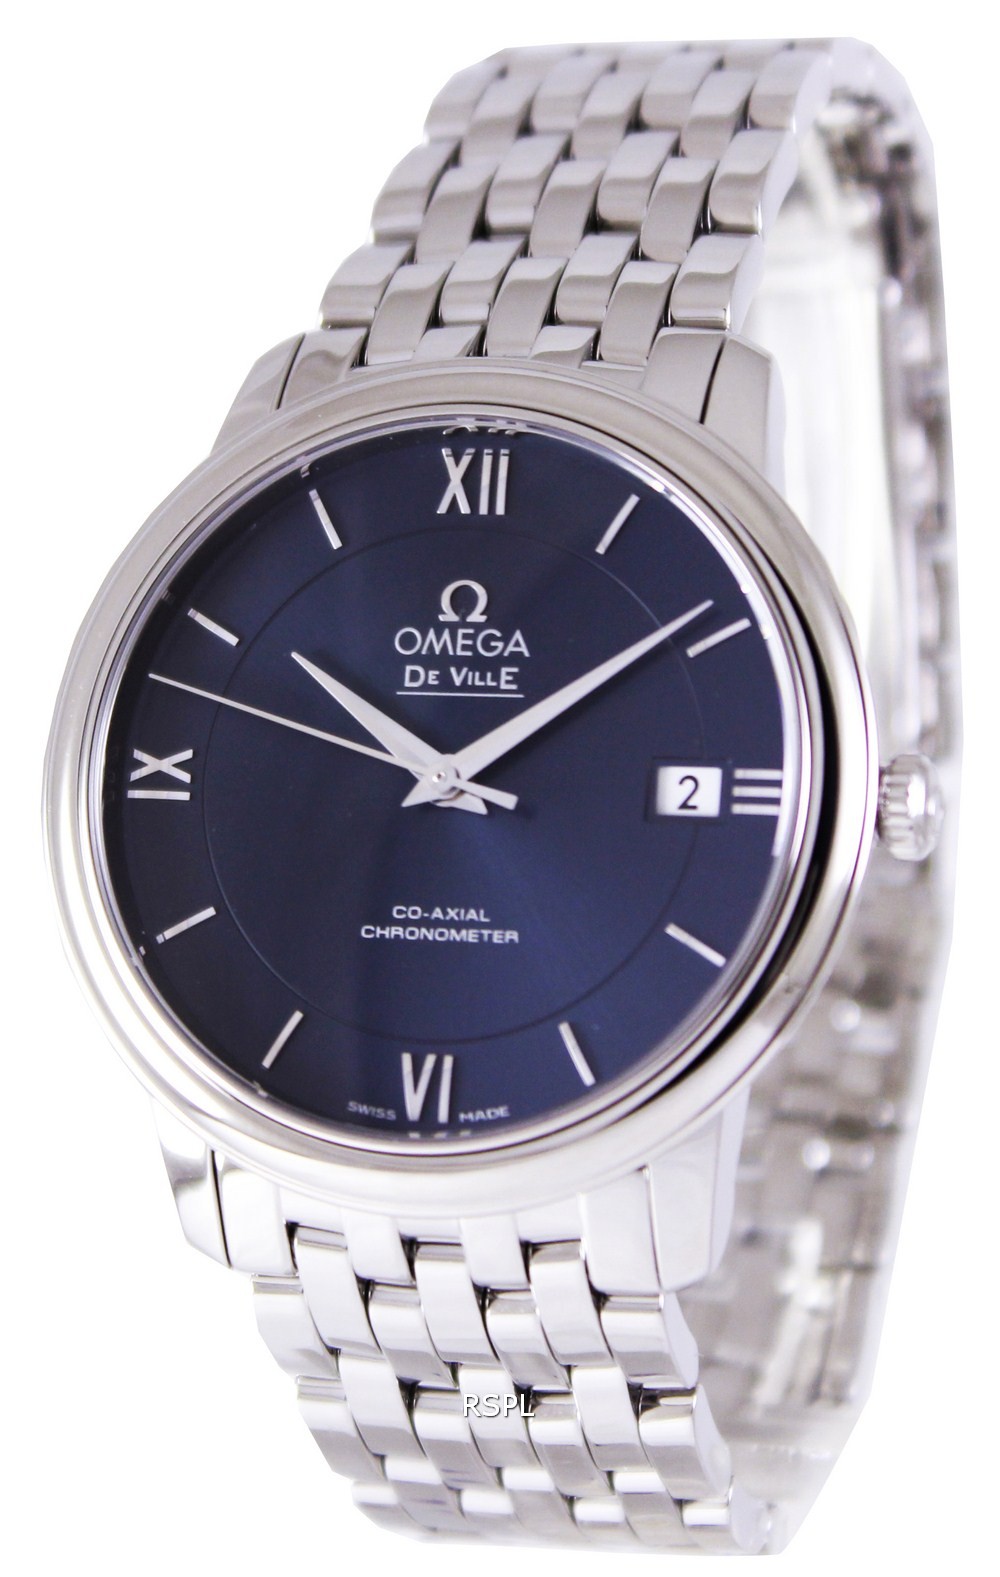 Omega De Ville Prestige Co-Axial Chronometer 424.10.37.20.03.001 Men’s Watch.jpg  by creationwatches